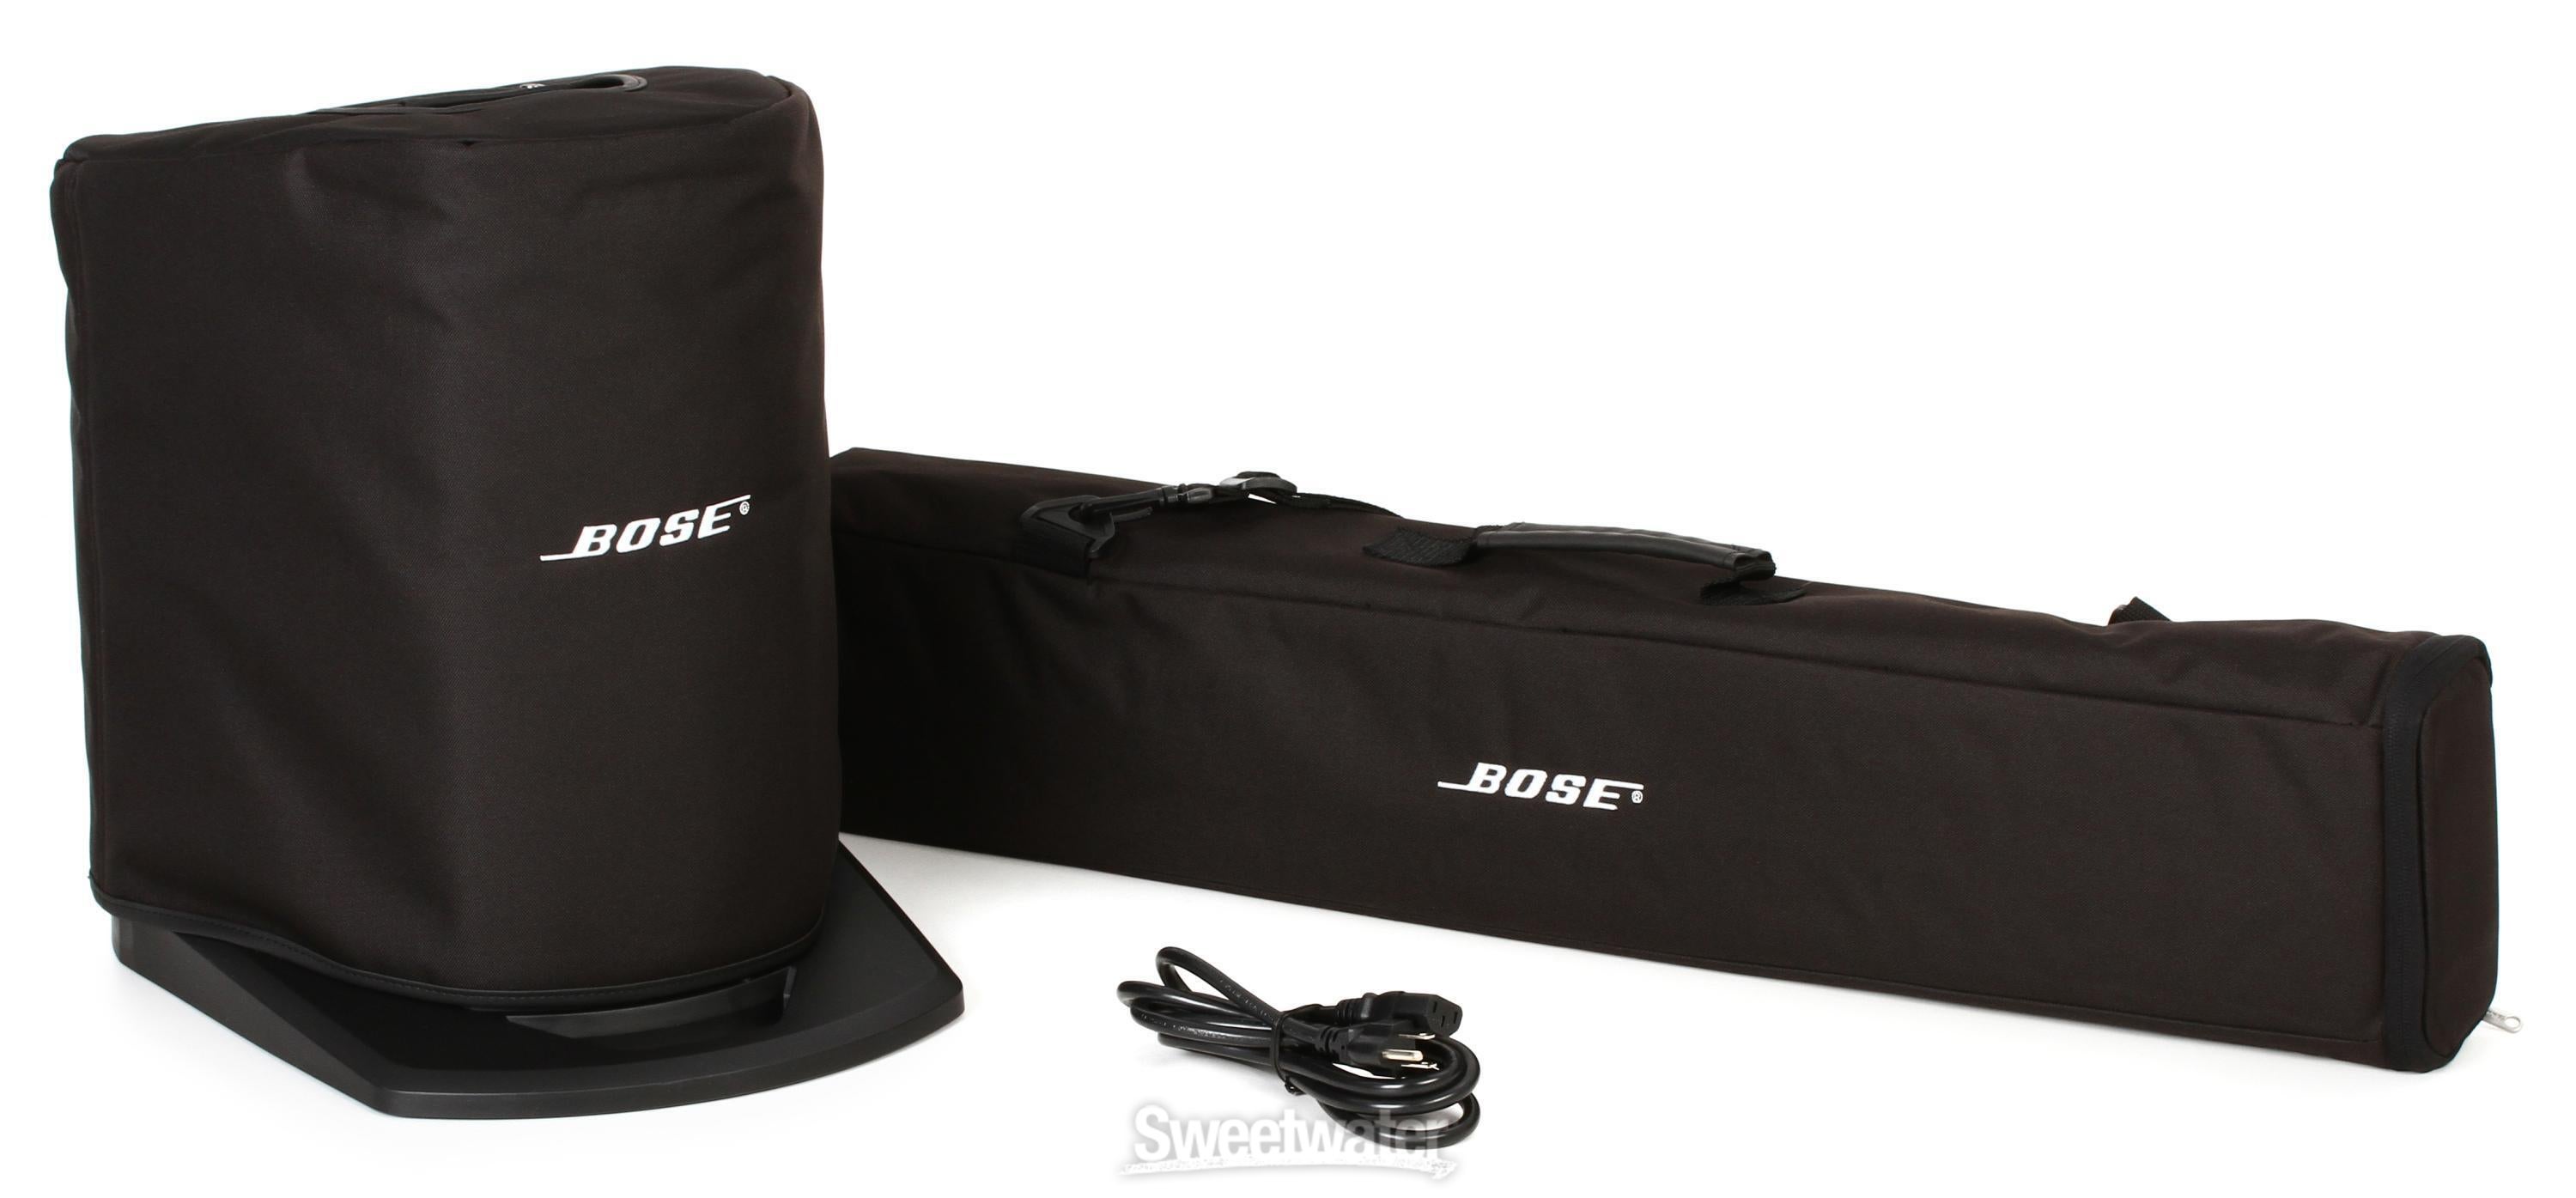 Bose L1 Compact Portable PA System Reviews | Sweetwater